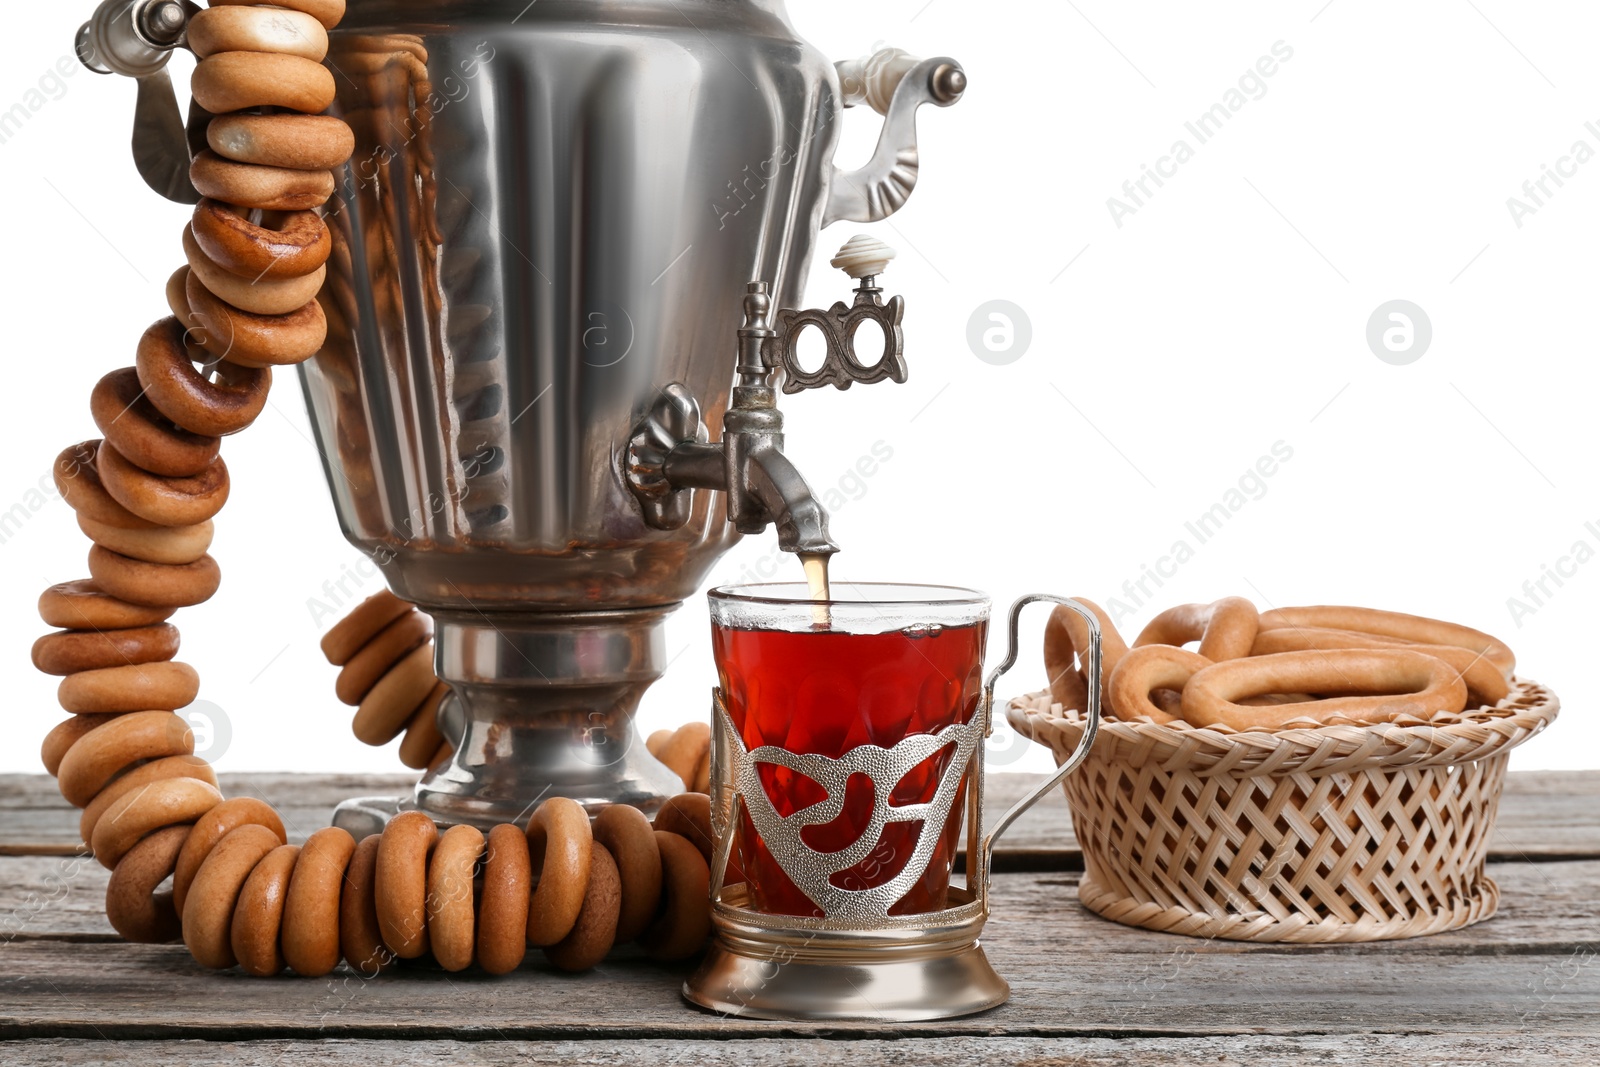 Photo of Samovar with hot tea, jam and delicious ring shaped Sushki (dry bagels) on table against white background